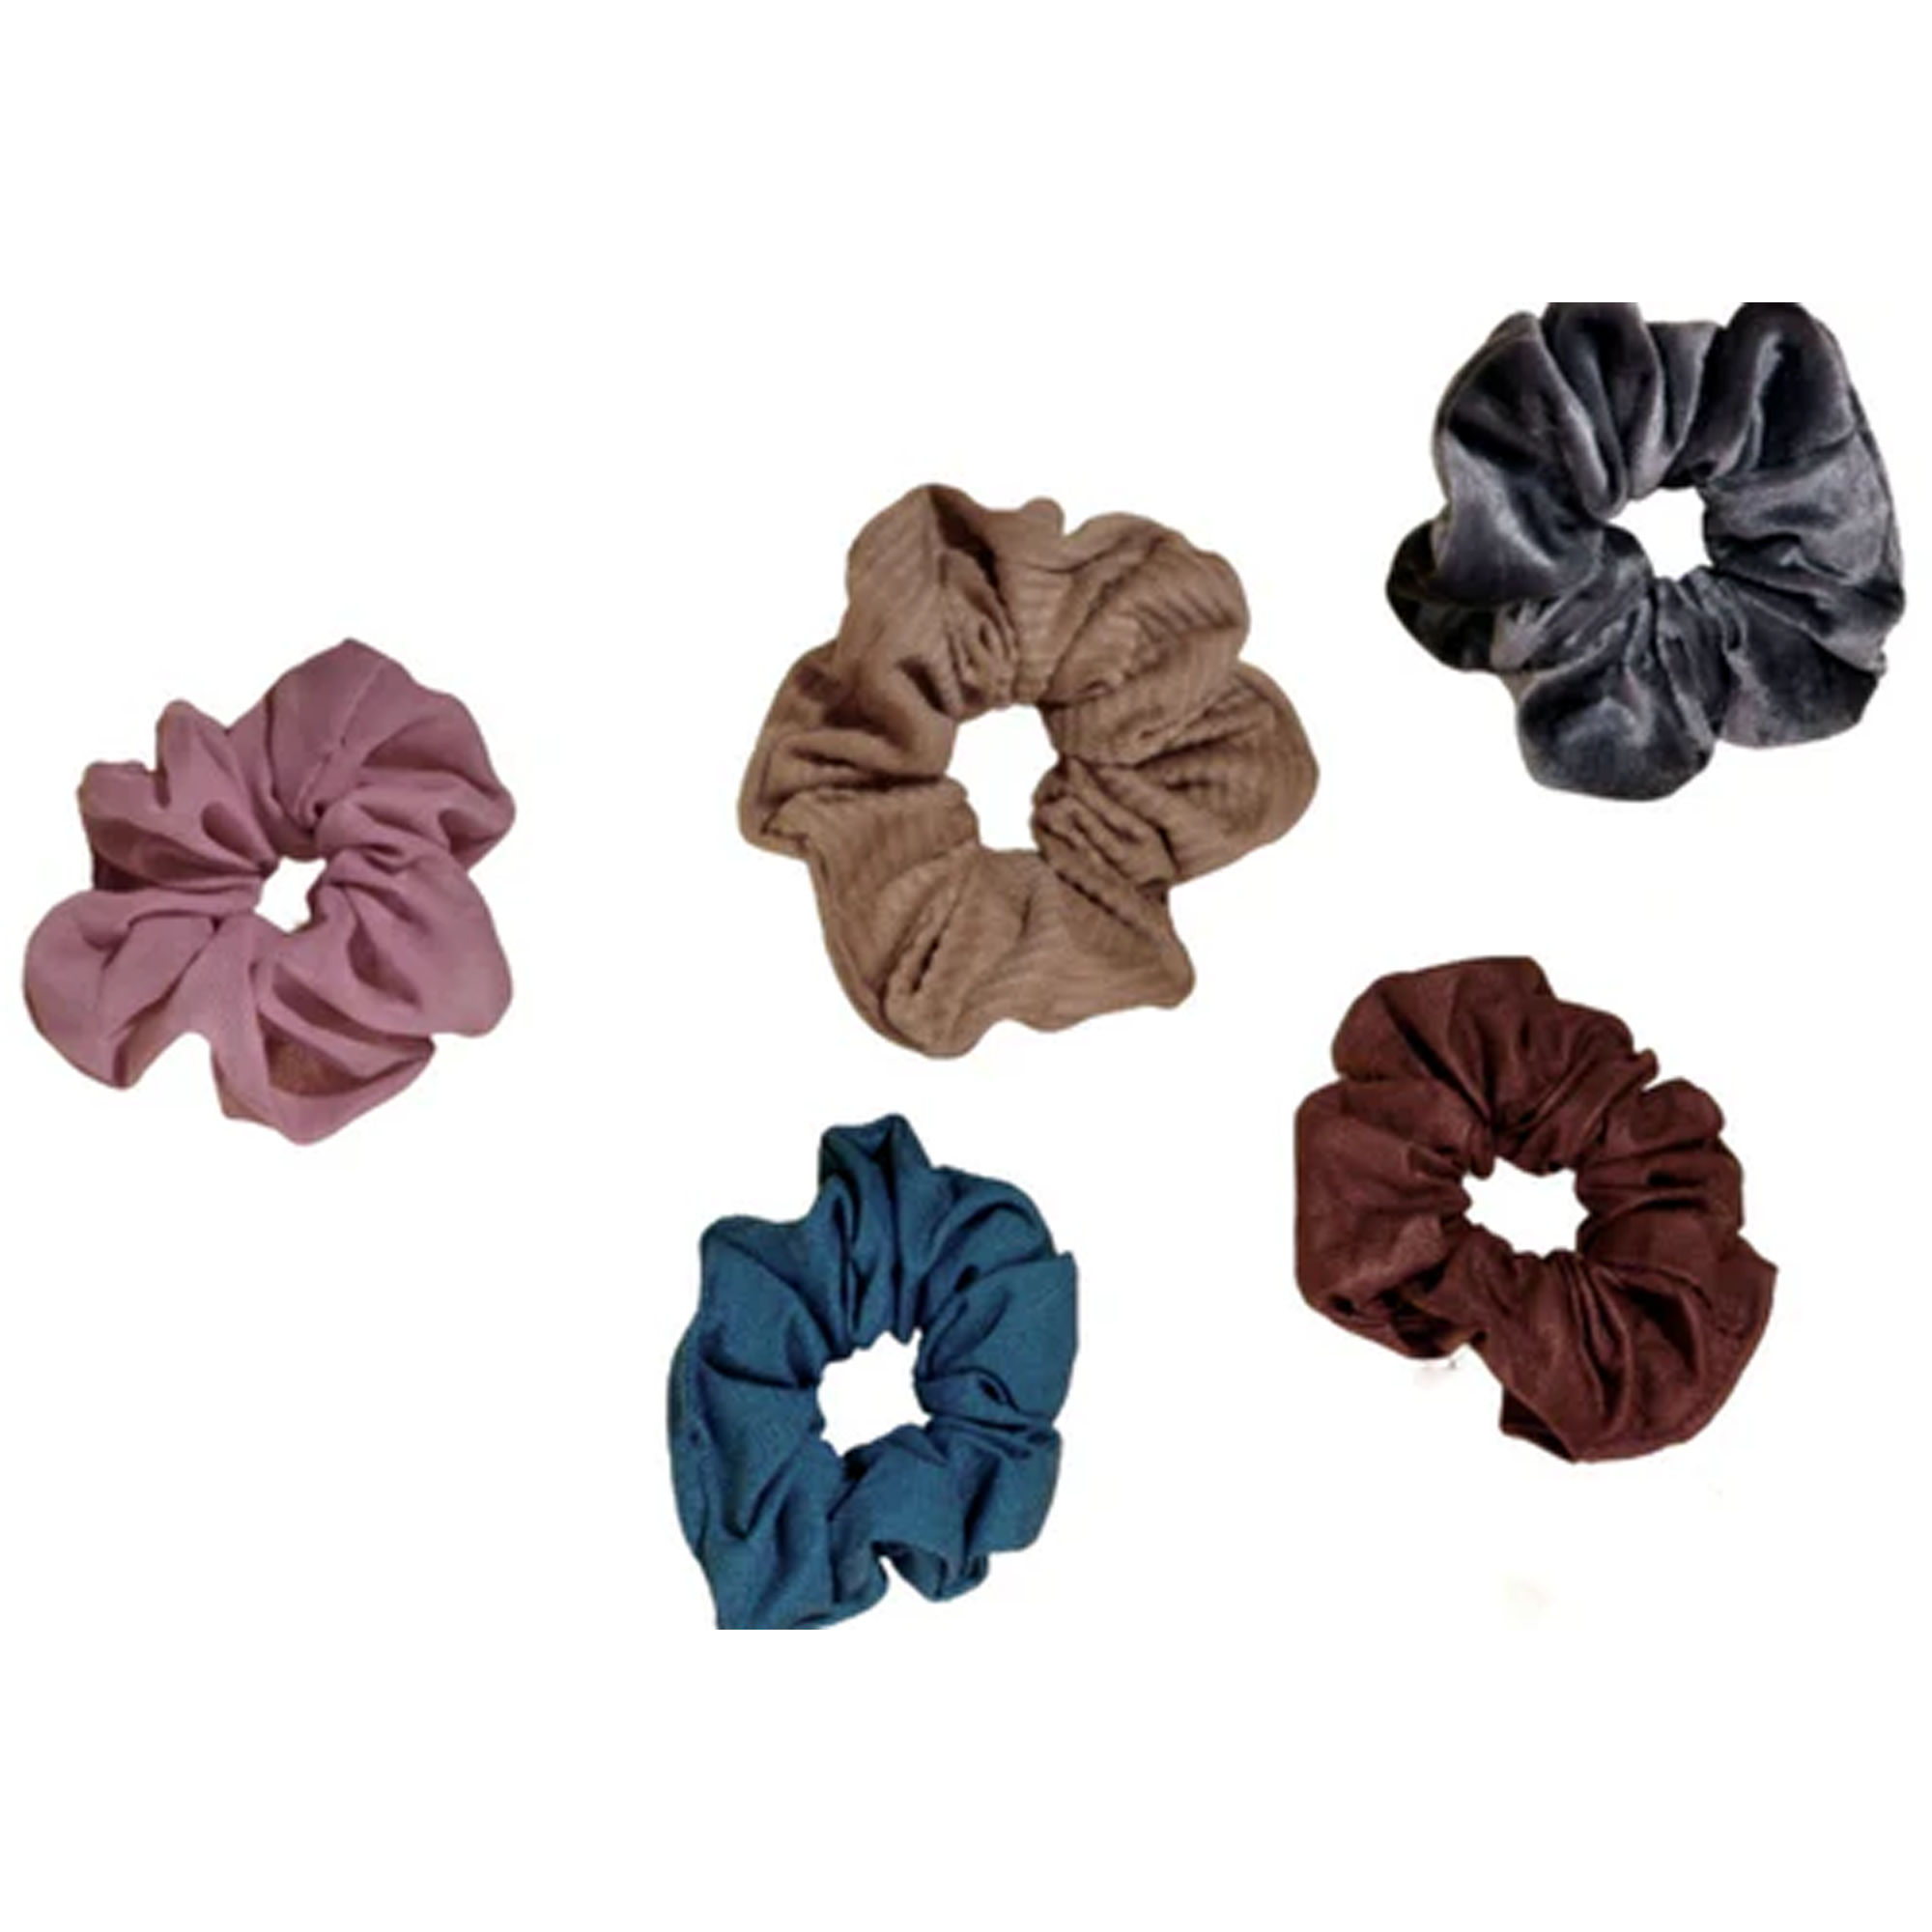 Fashion Scrunchie Variety Pack (5 Count)